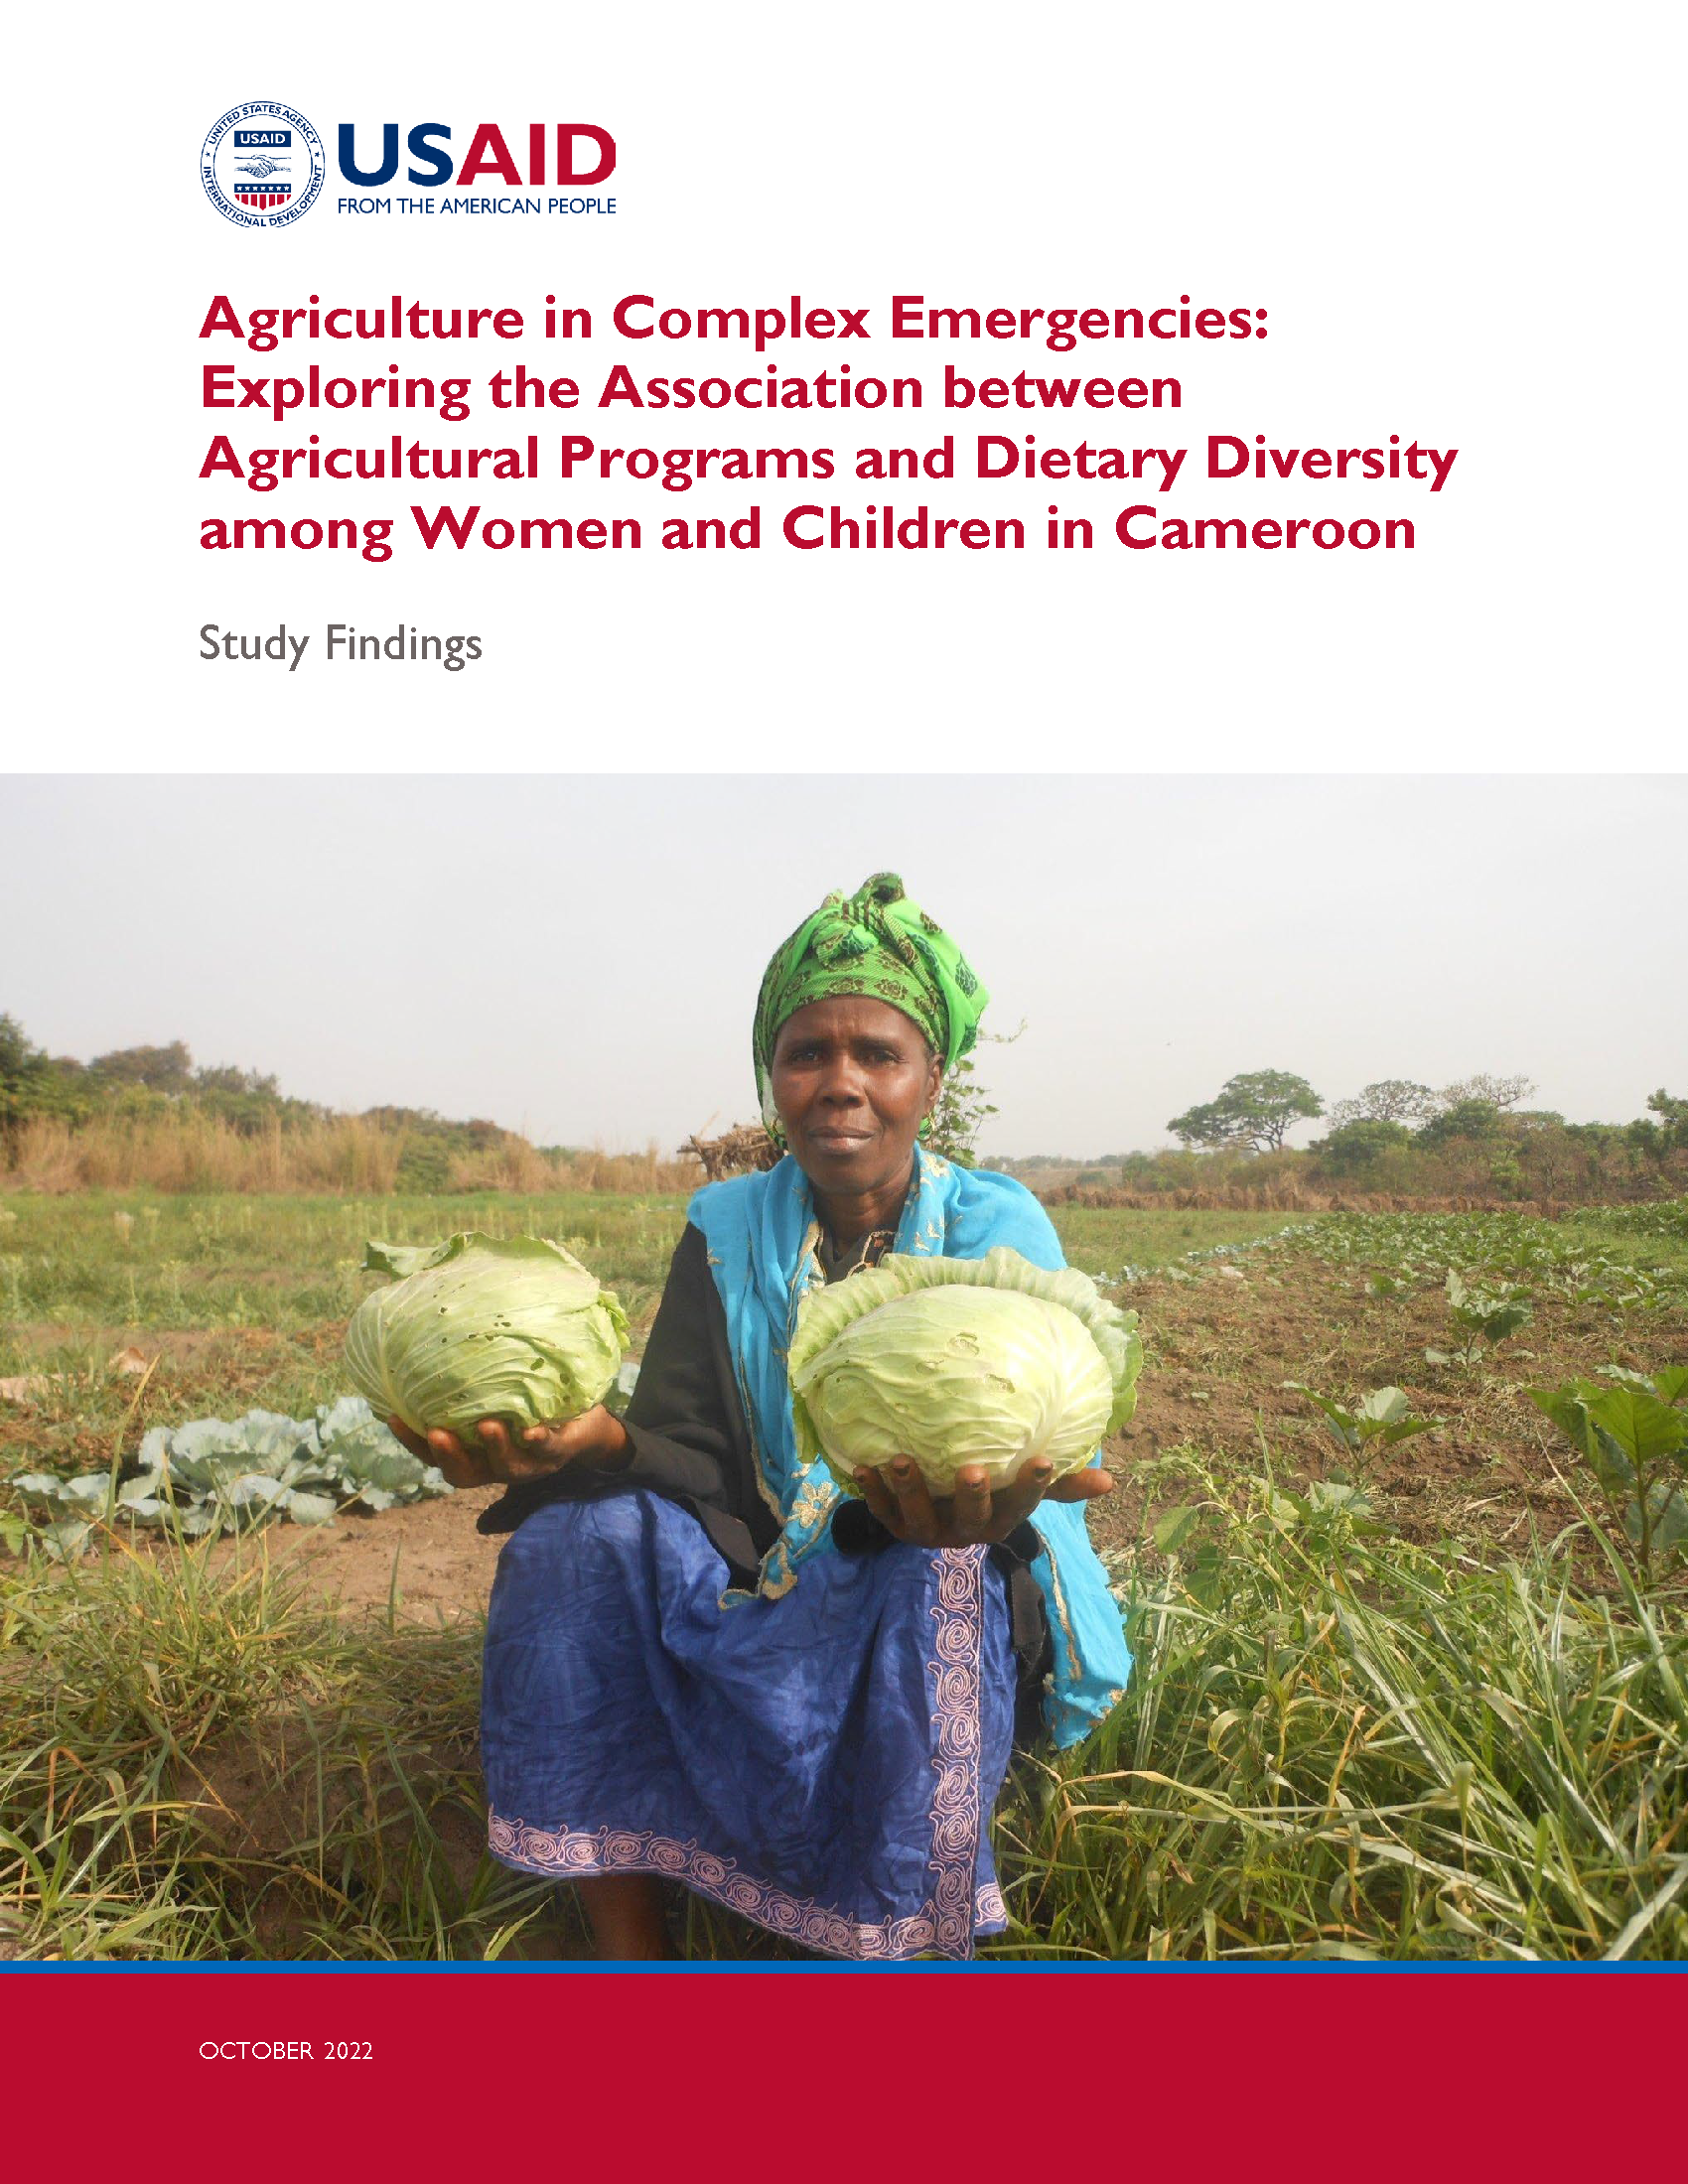 Cover page for Agriculture in Complex Emergencies: Exploring the Association between Agricultural Programs and Dietary Diversity among Women and Children in Cameroon